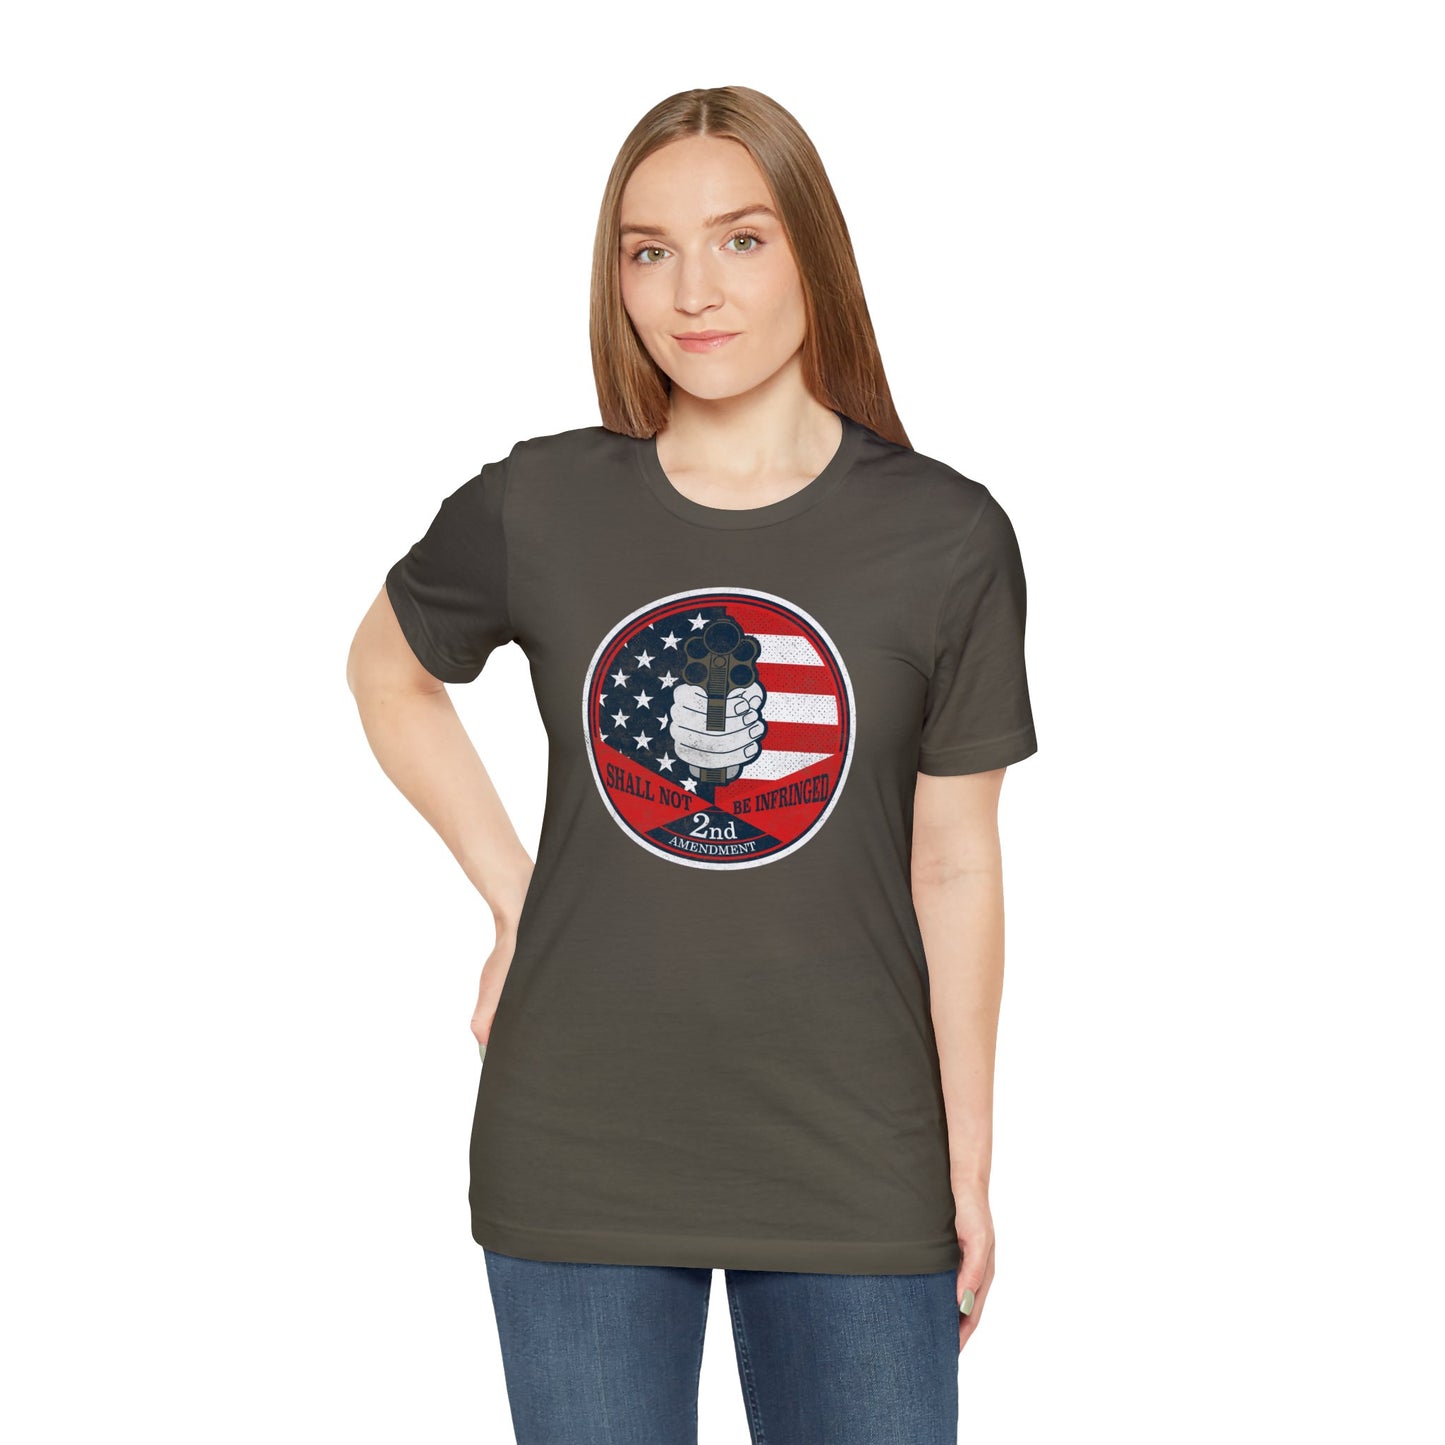 Shall Not Be Infringed T-Shirt